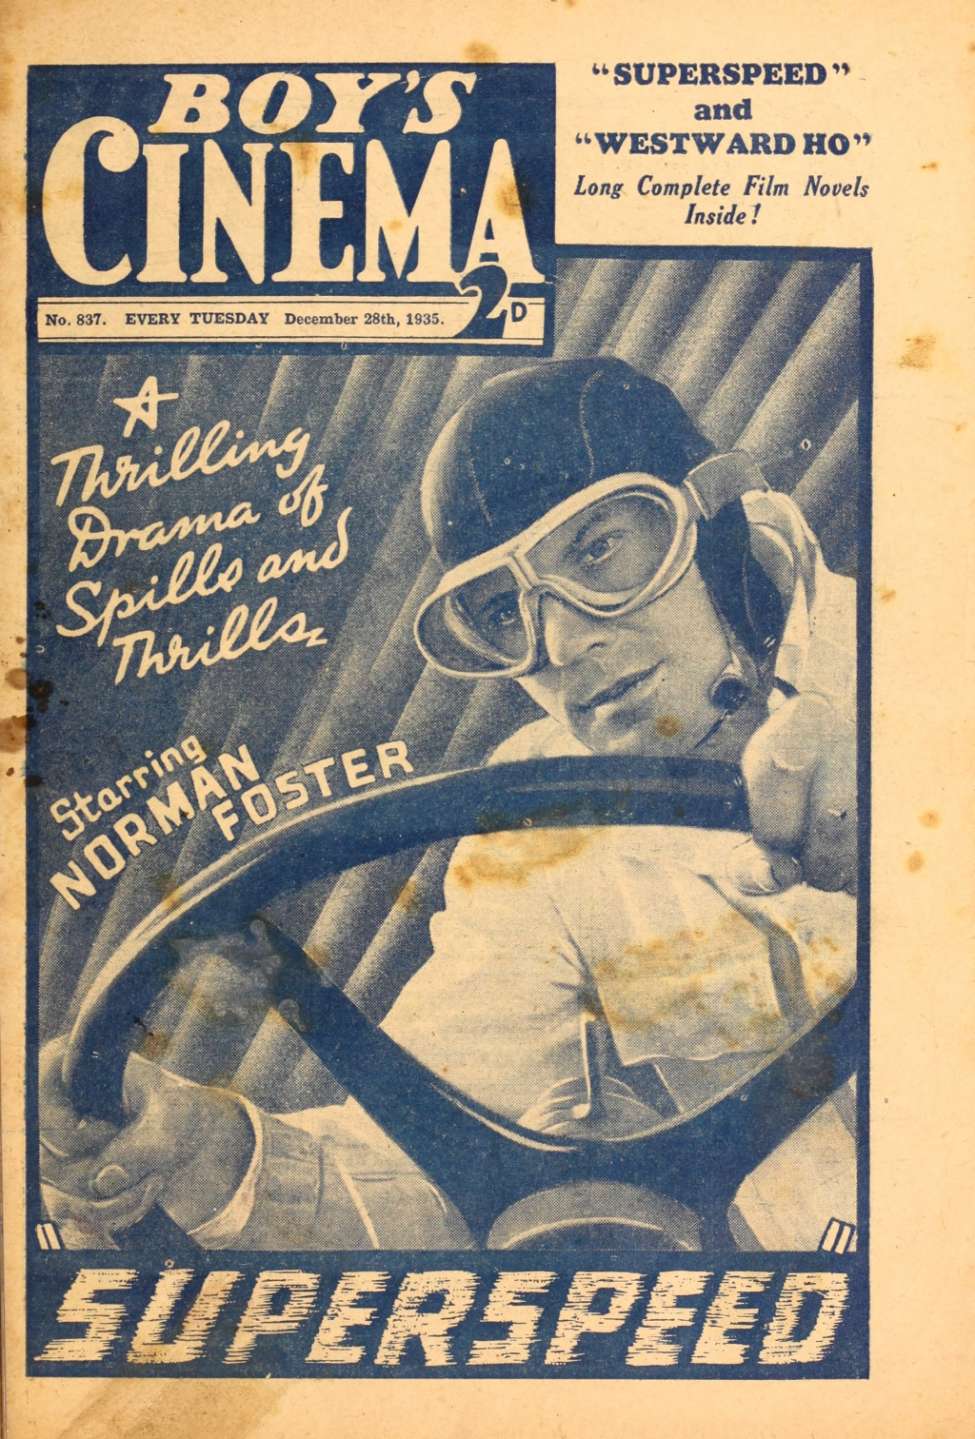 Book Cover For Boy's Cinema 837 - Superspeed - Norman Foster